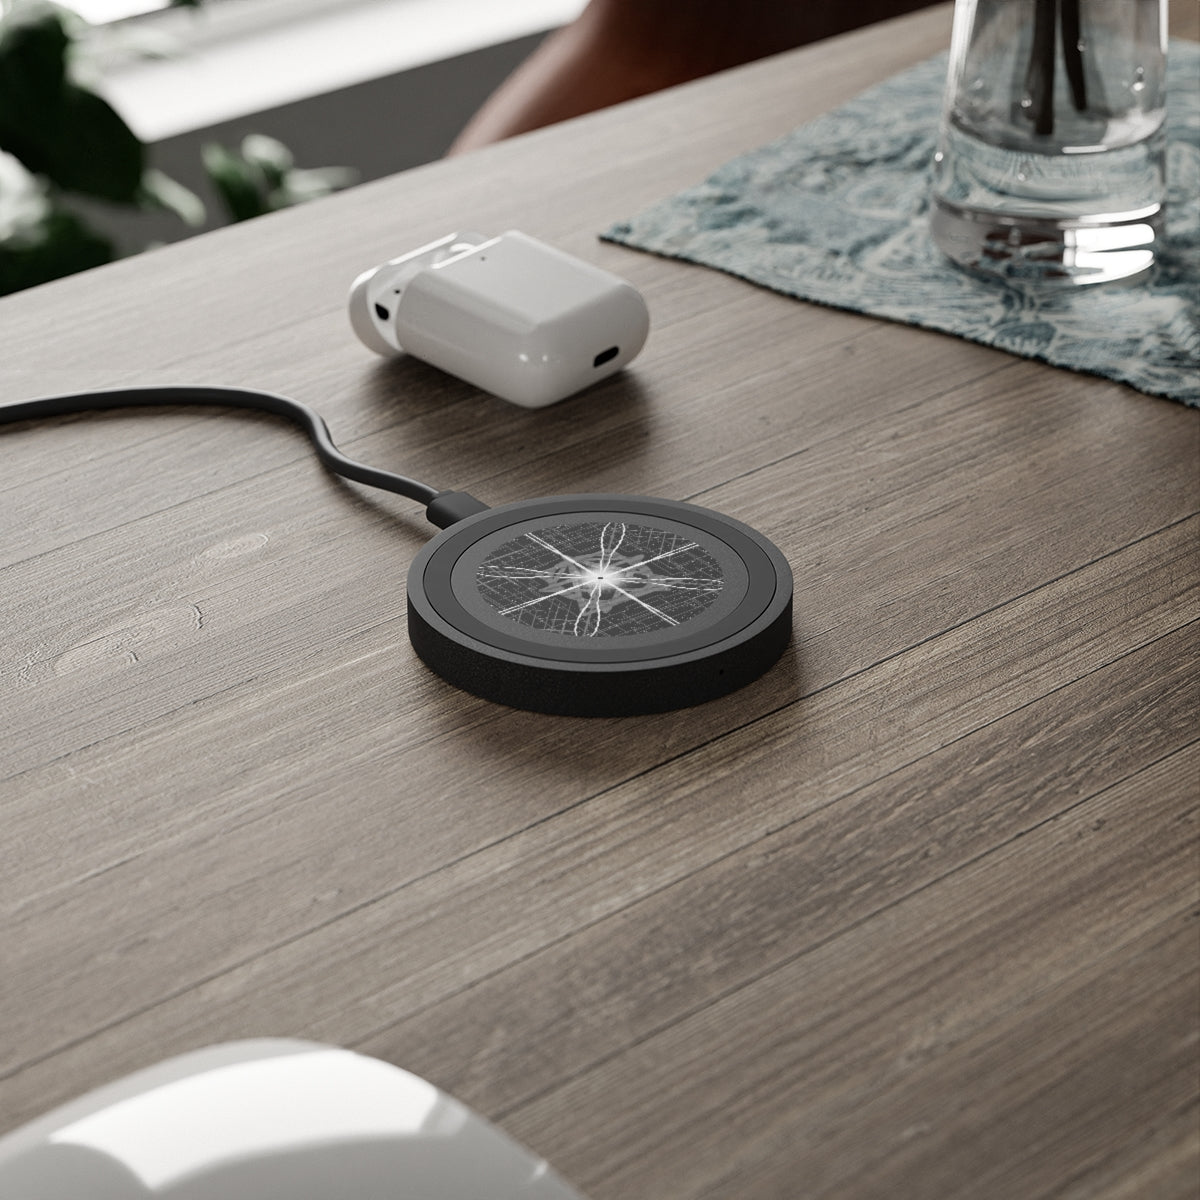 Quake Wireless Charging Pad - Fast and Convenient Charging for iPhones and Android Smartphones